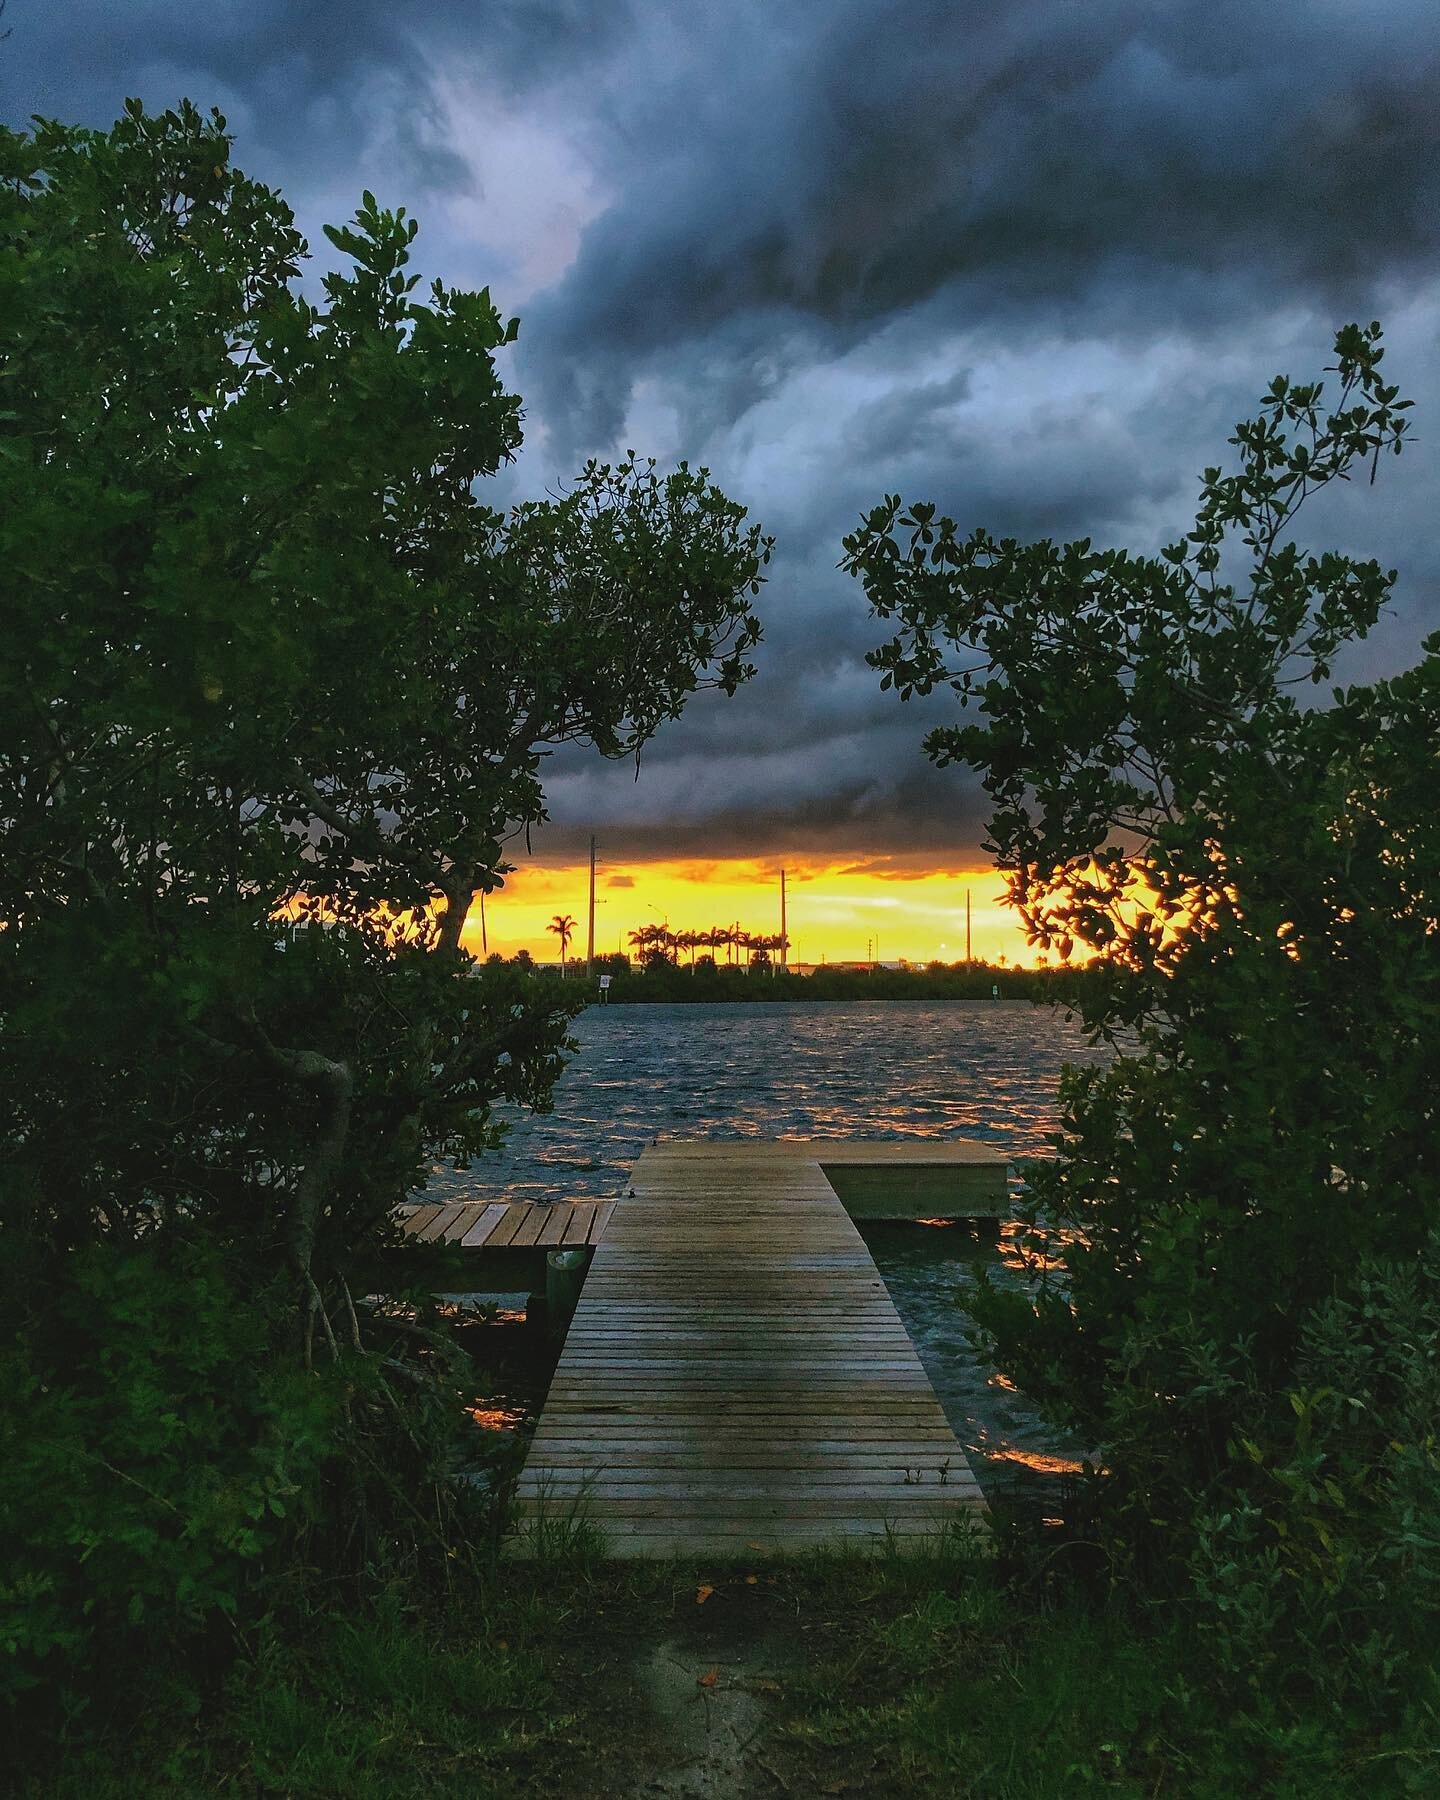 Have you ever lived where the weather changes from one extreme to another in a blink??
&bull; &bull; &bull;
From ominous lightning storms to a fireball sunset and 10 seconds later ... a peaceful evening? 
Meet Florida.
&bull; &bull; &bull;
Swipe ⬅️ t